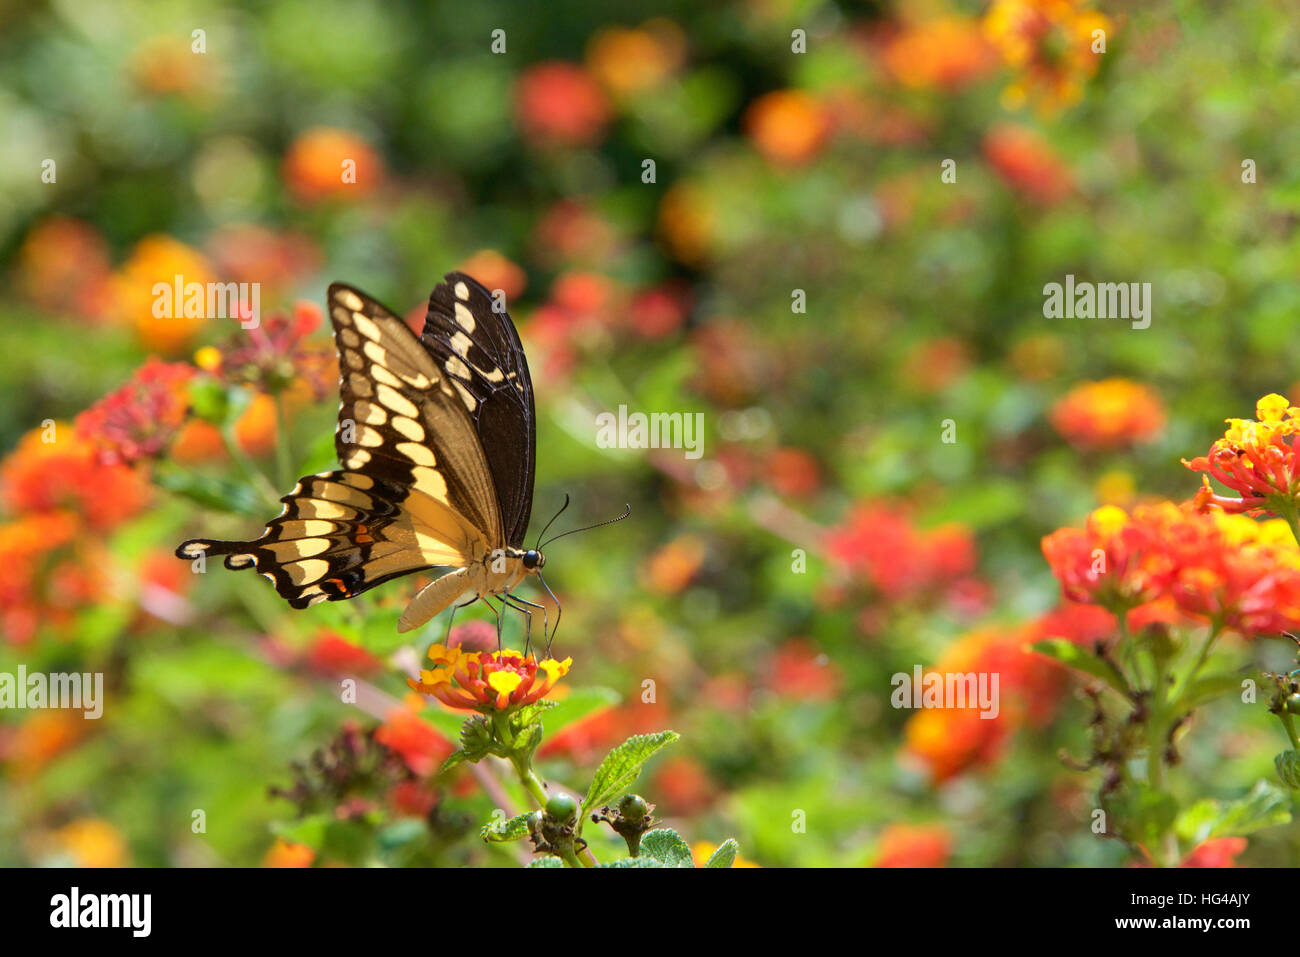 The Black Swallowtail butterfly, also called the American Swallowtail or Parsnip Swallowtail. Drinking nectar from orange and yellow Lantana flowers, Stock Photo